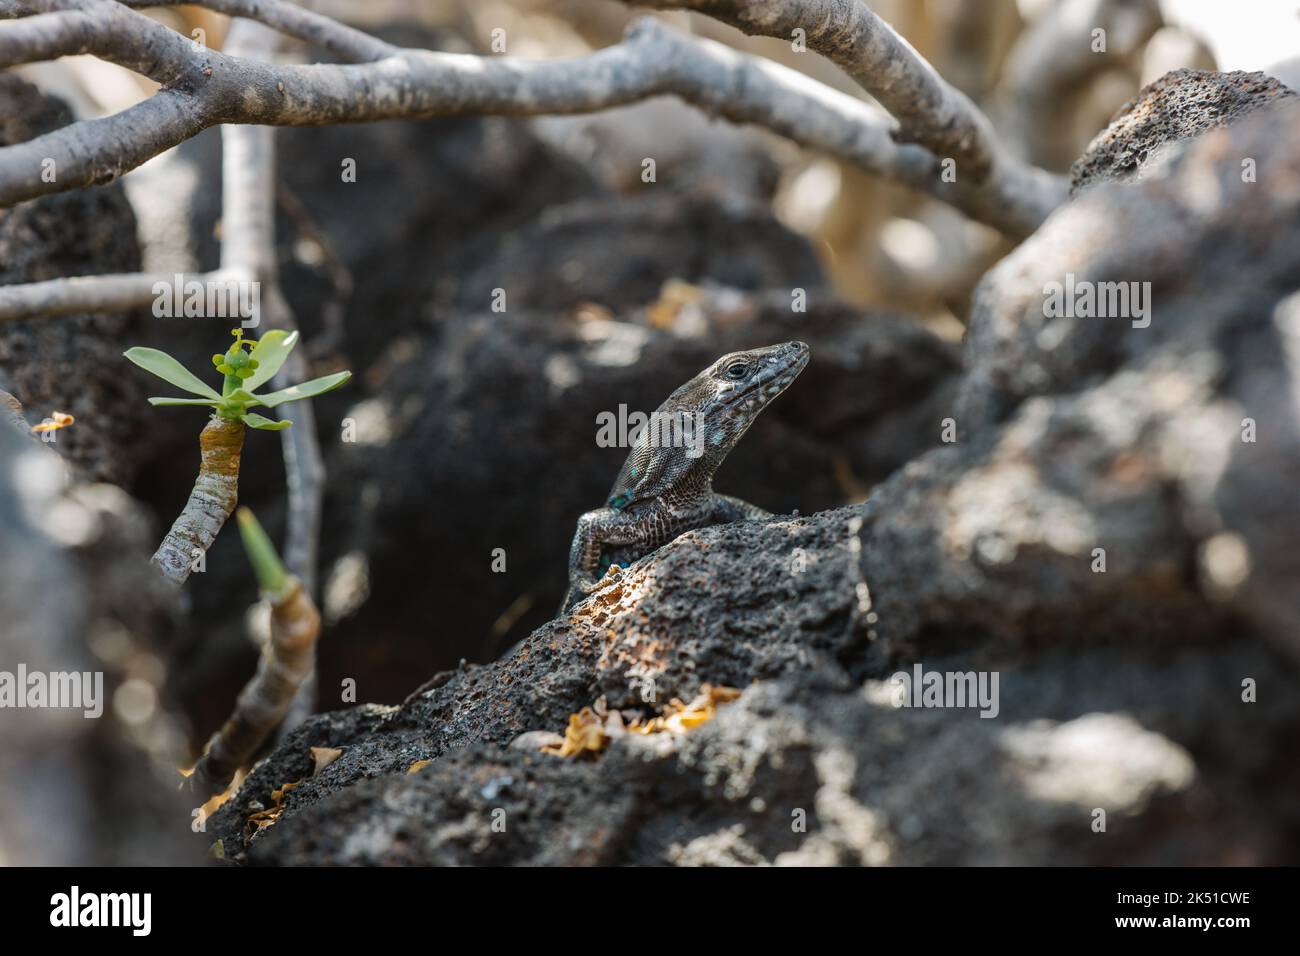 Wild gallotia atlantica lizard crawling on rough stones under twigs on sunny day in nature Stock Photo